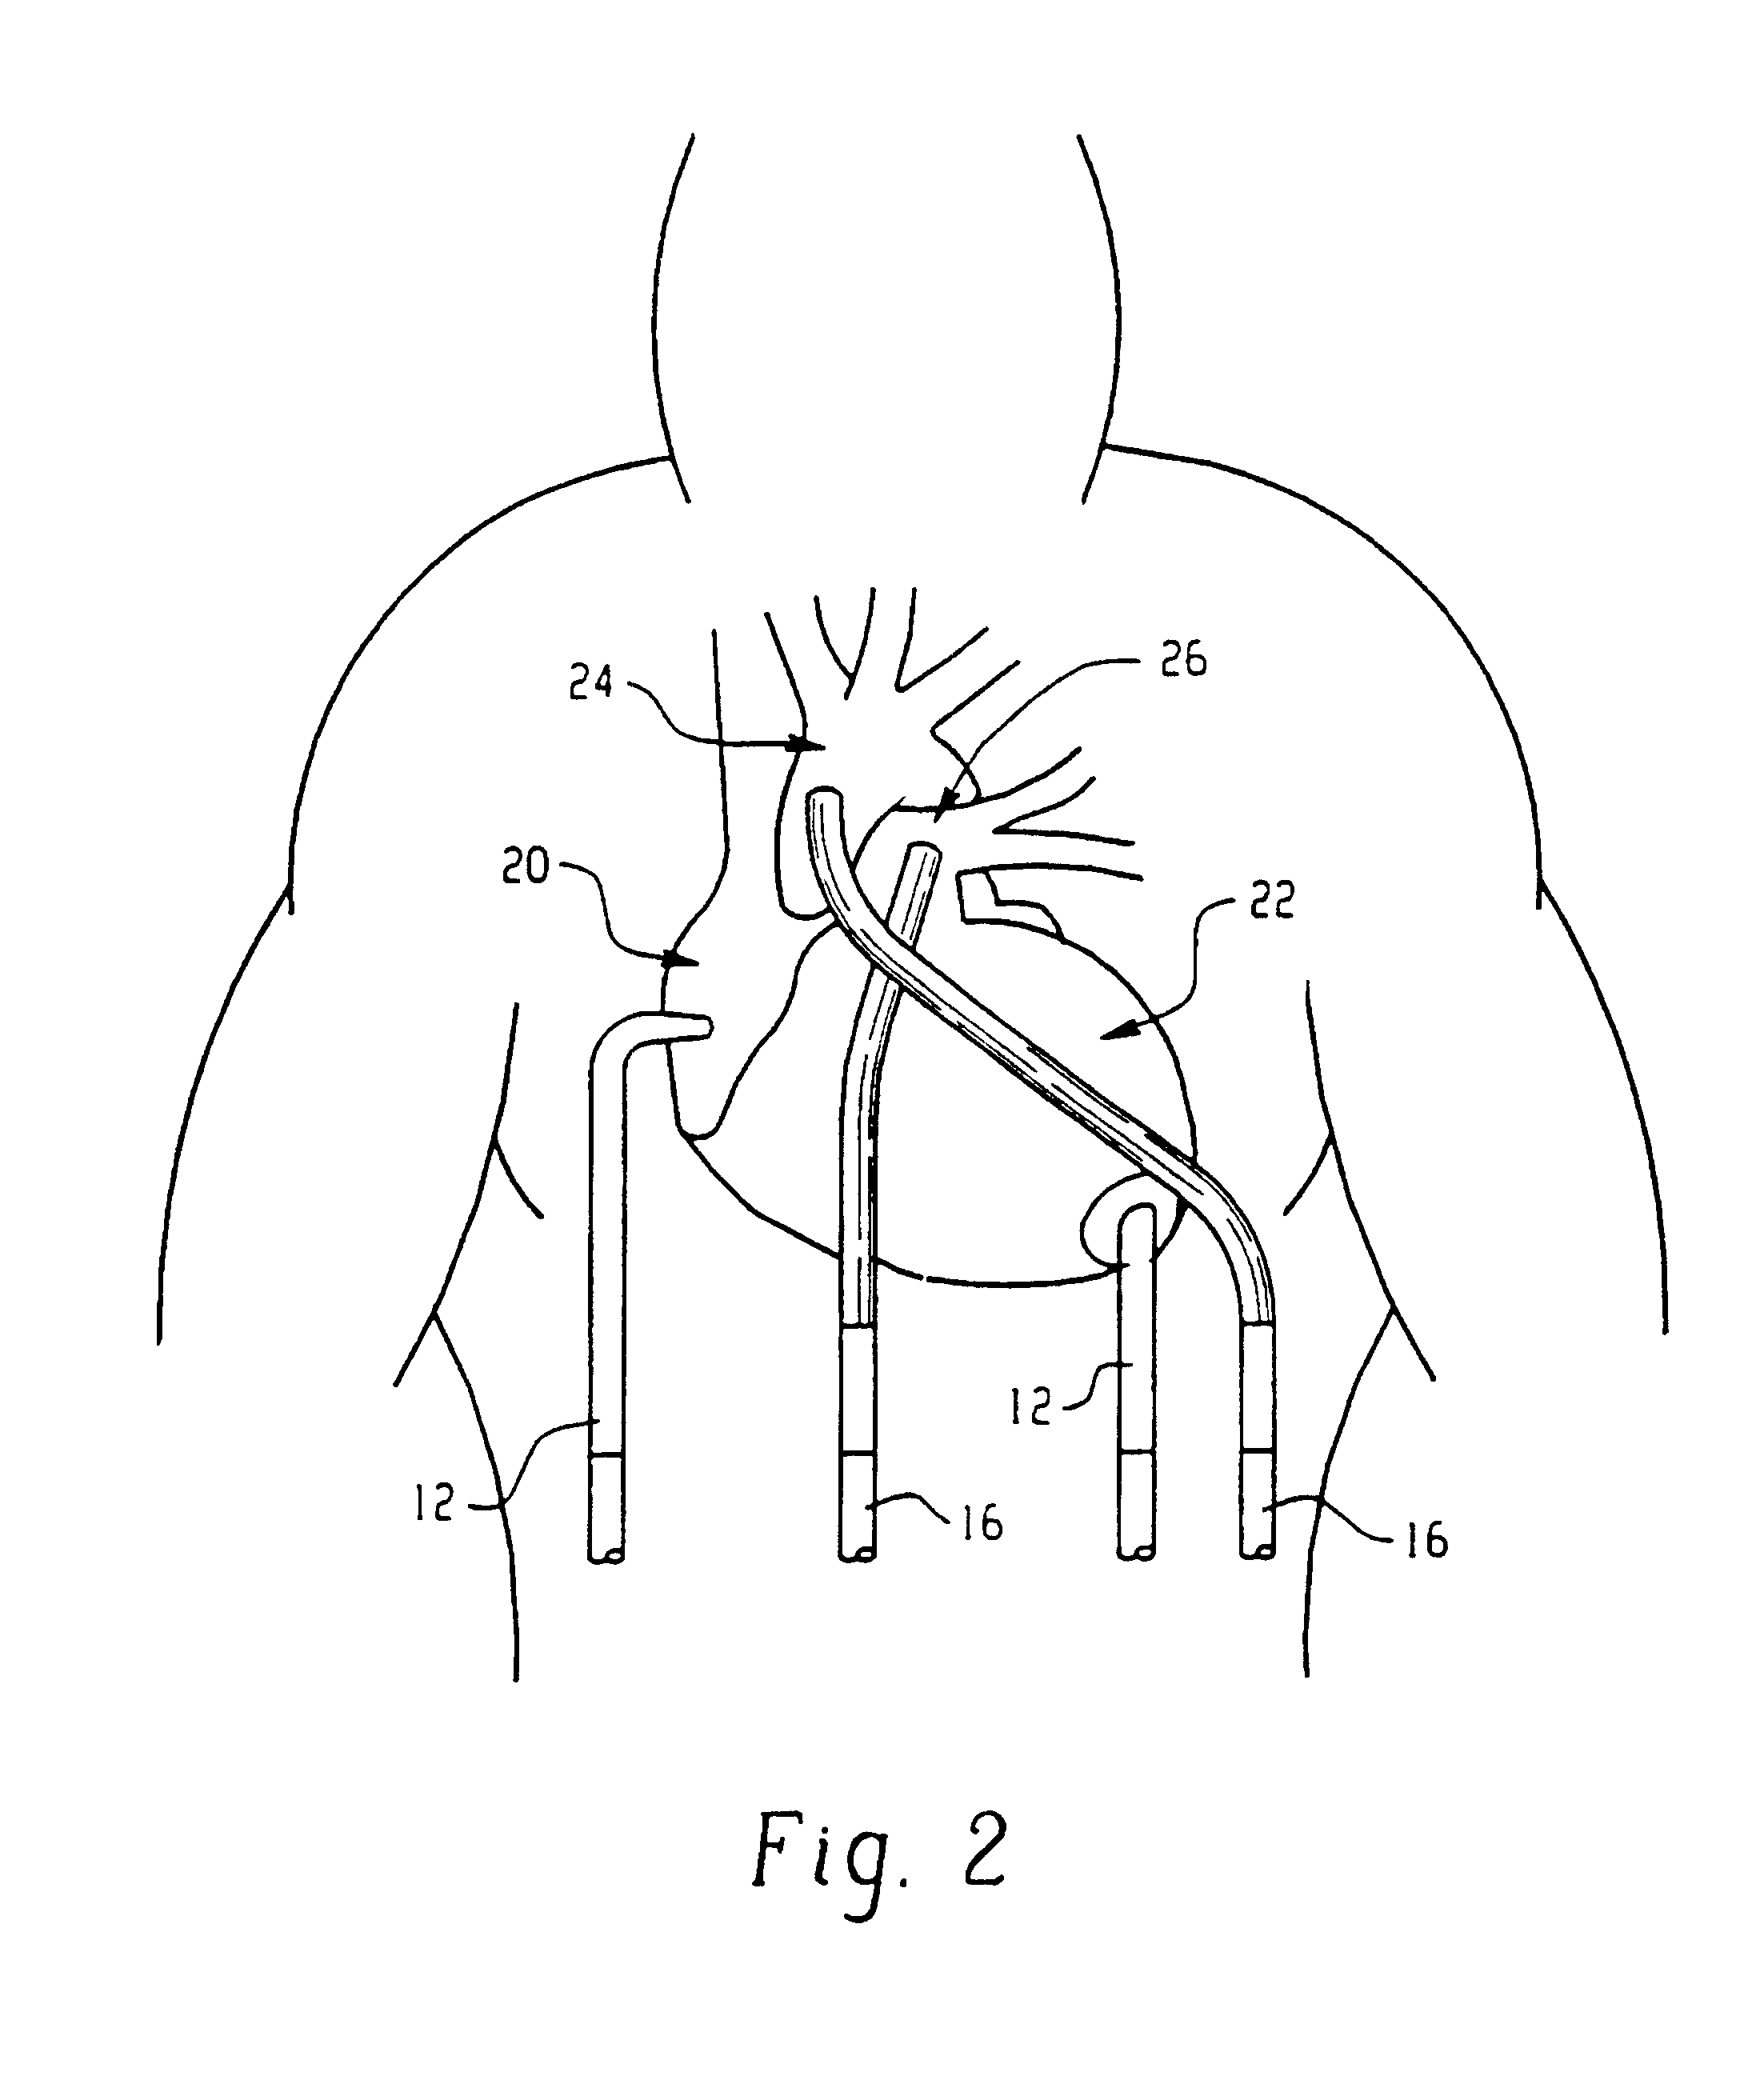 System for incorporating sonomicrometer functions into medical instruments and implantable biomedical devices